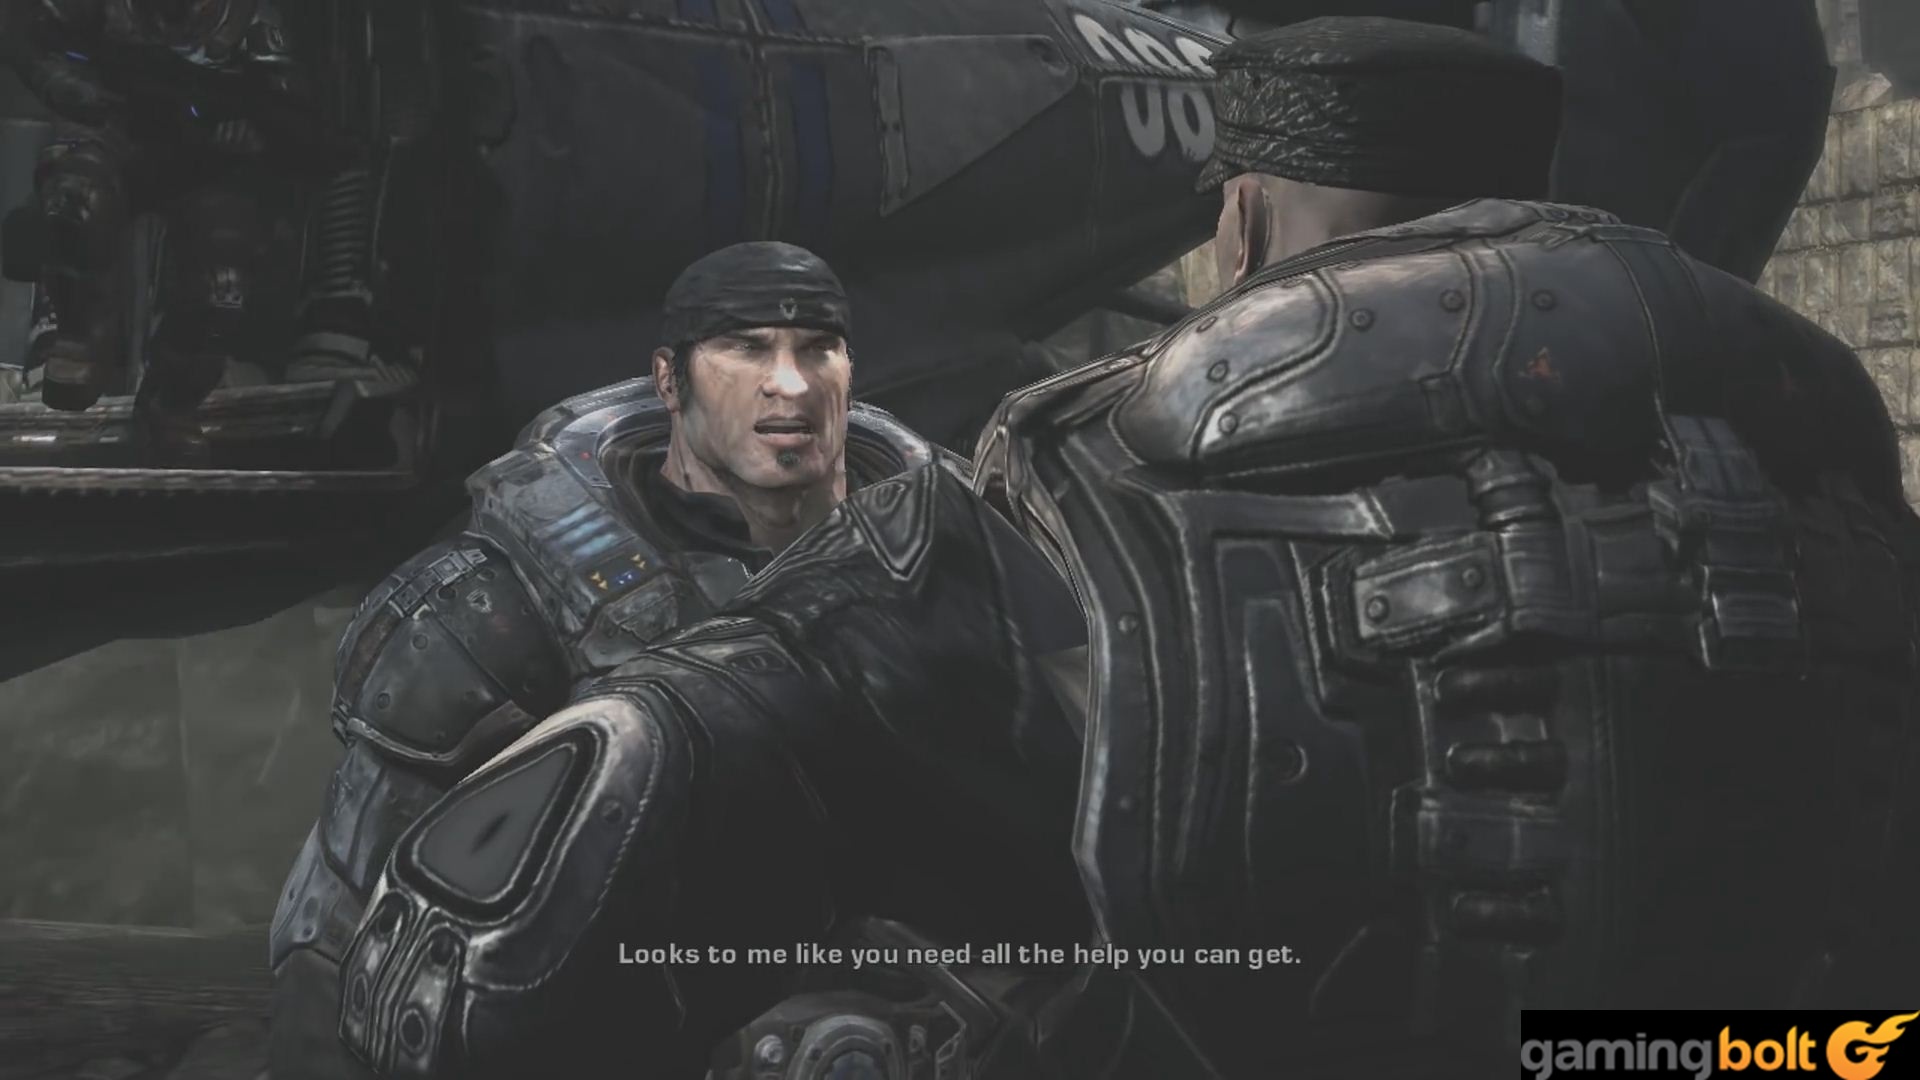 Gears Of War 3 Looks Incredible In 4K; Xbox 360 Vs. Xbox One X Comparison  Images Revealed - ThisGenGaming